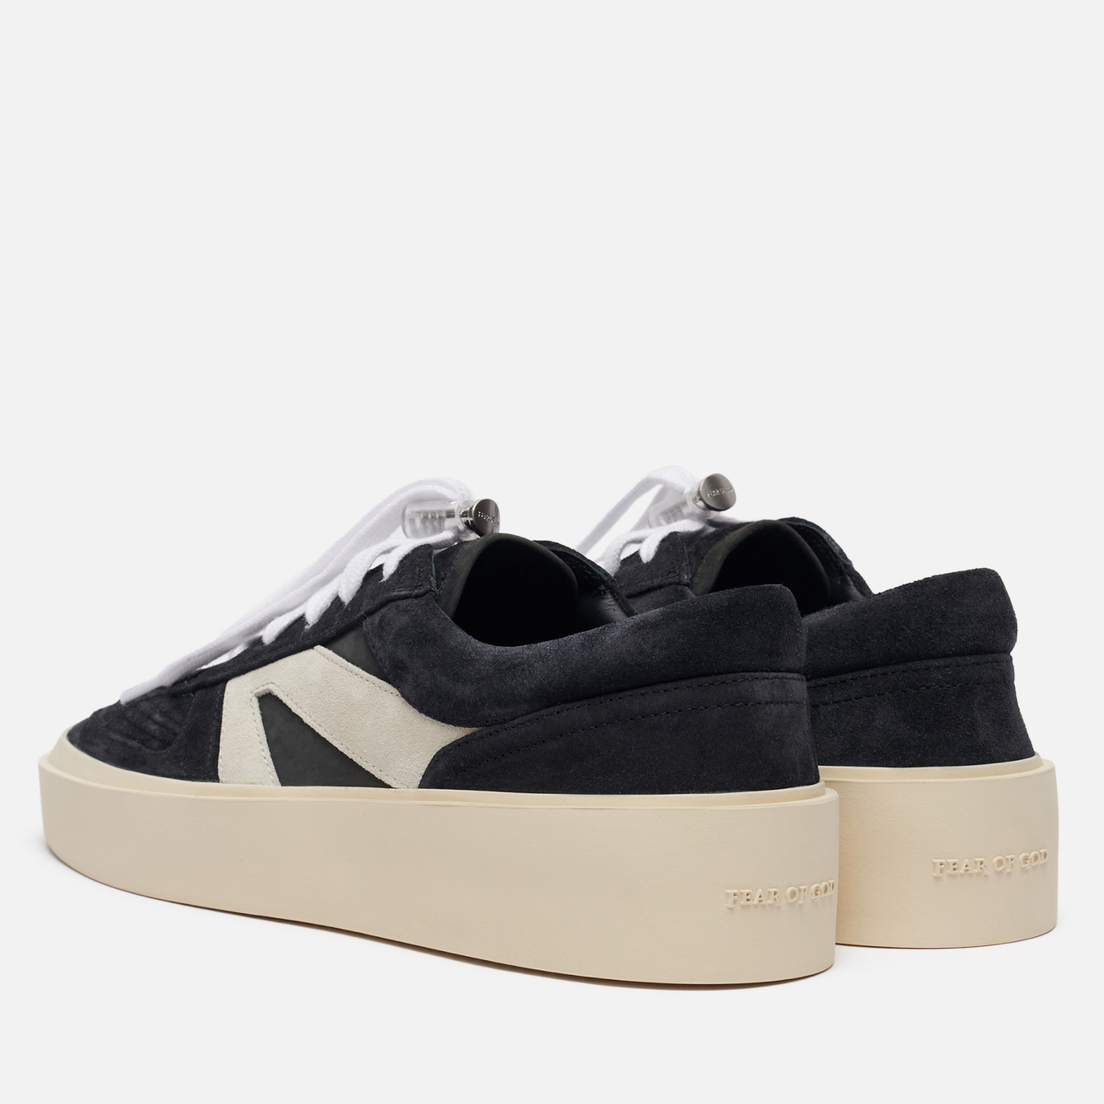 Fear of God Мужские кроссовки Skate Low Suede/Leather